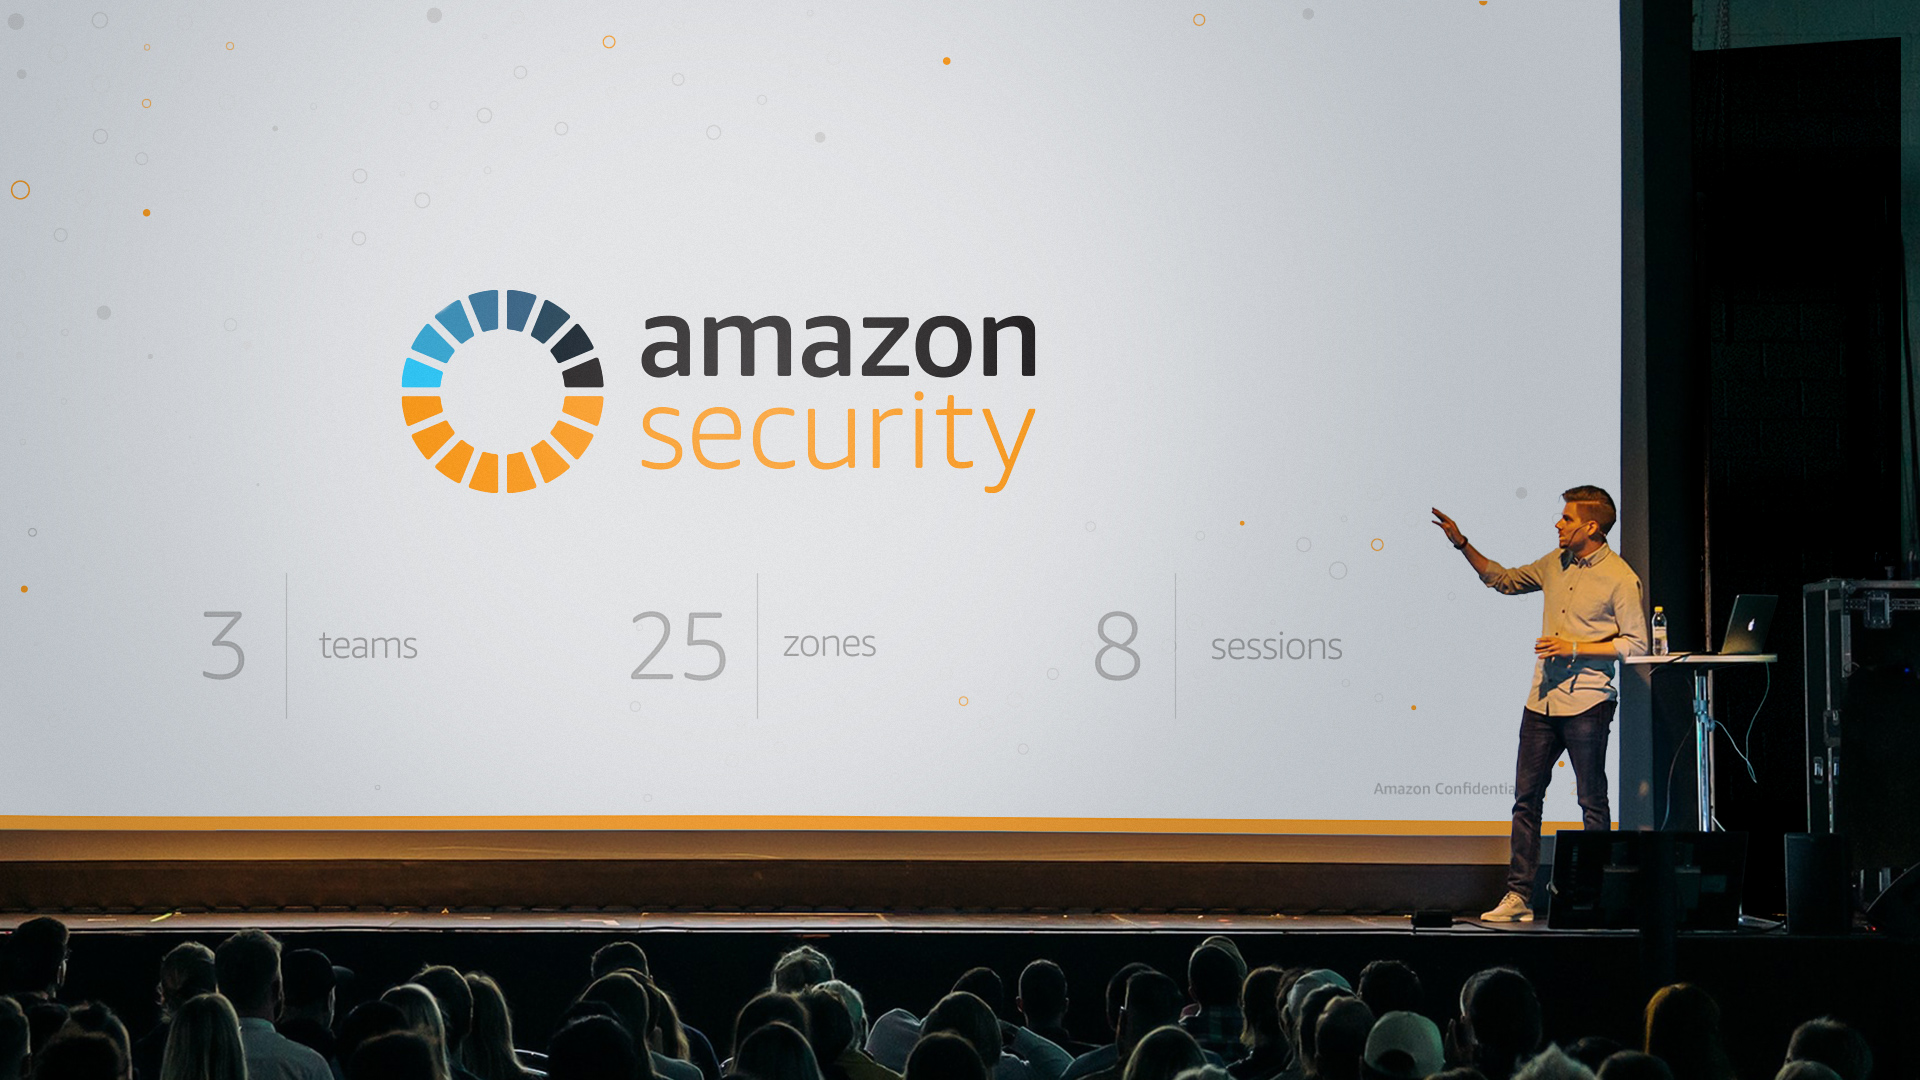 Amazon Security Branding showing an image of the logo and a speaker created by Incubate Design